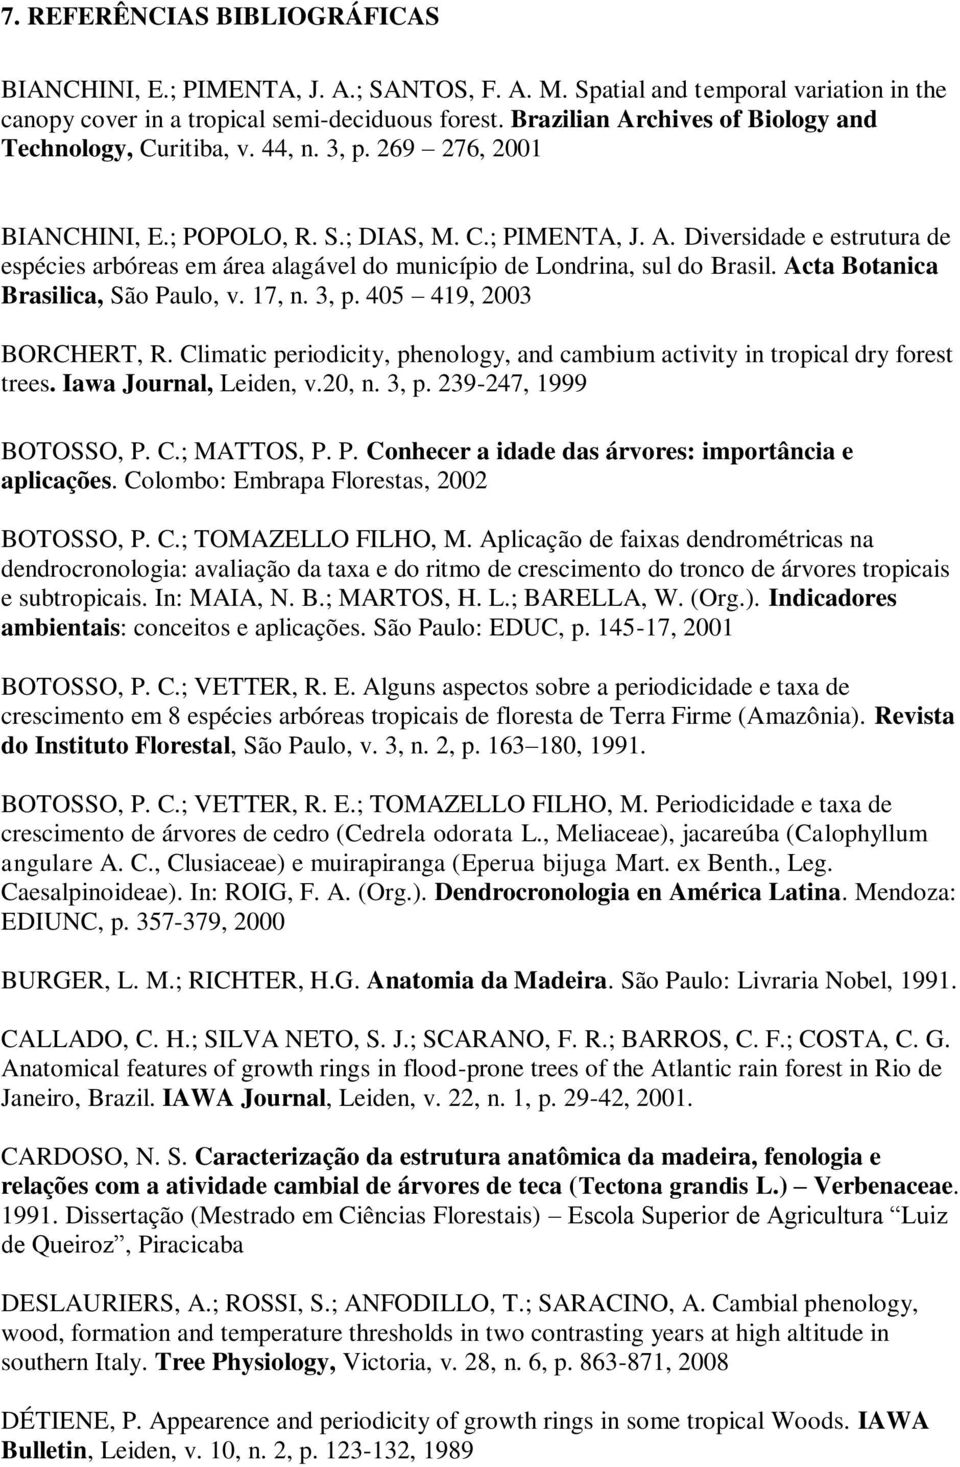 Acta Botanica Brasilica, São Paulo, v. 17, n. 3, p. 405 419, 2003 BORCHERT, R. Climatic periodicity, phenology, and cambium activity in tropical dry forest trees. Iawa Journal, Leiden, v.20, n. 3, p. 239-247, 1999 BOTOSSO, P.